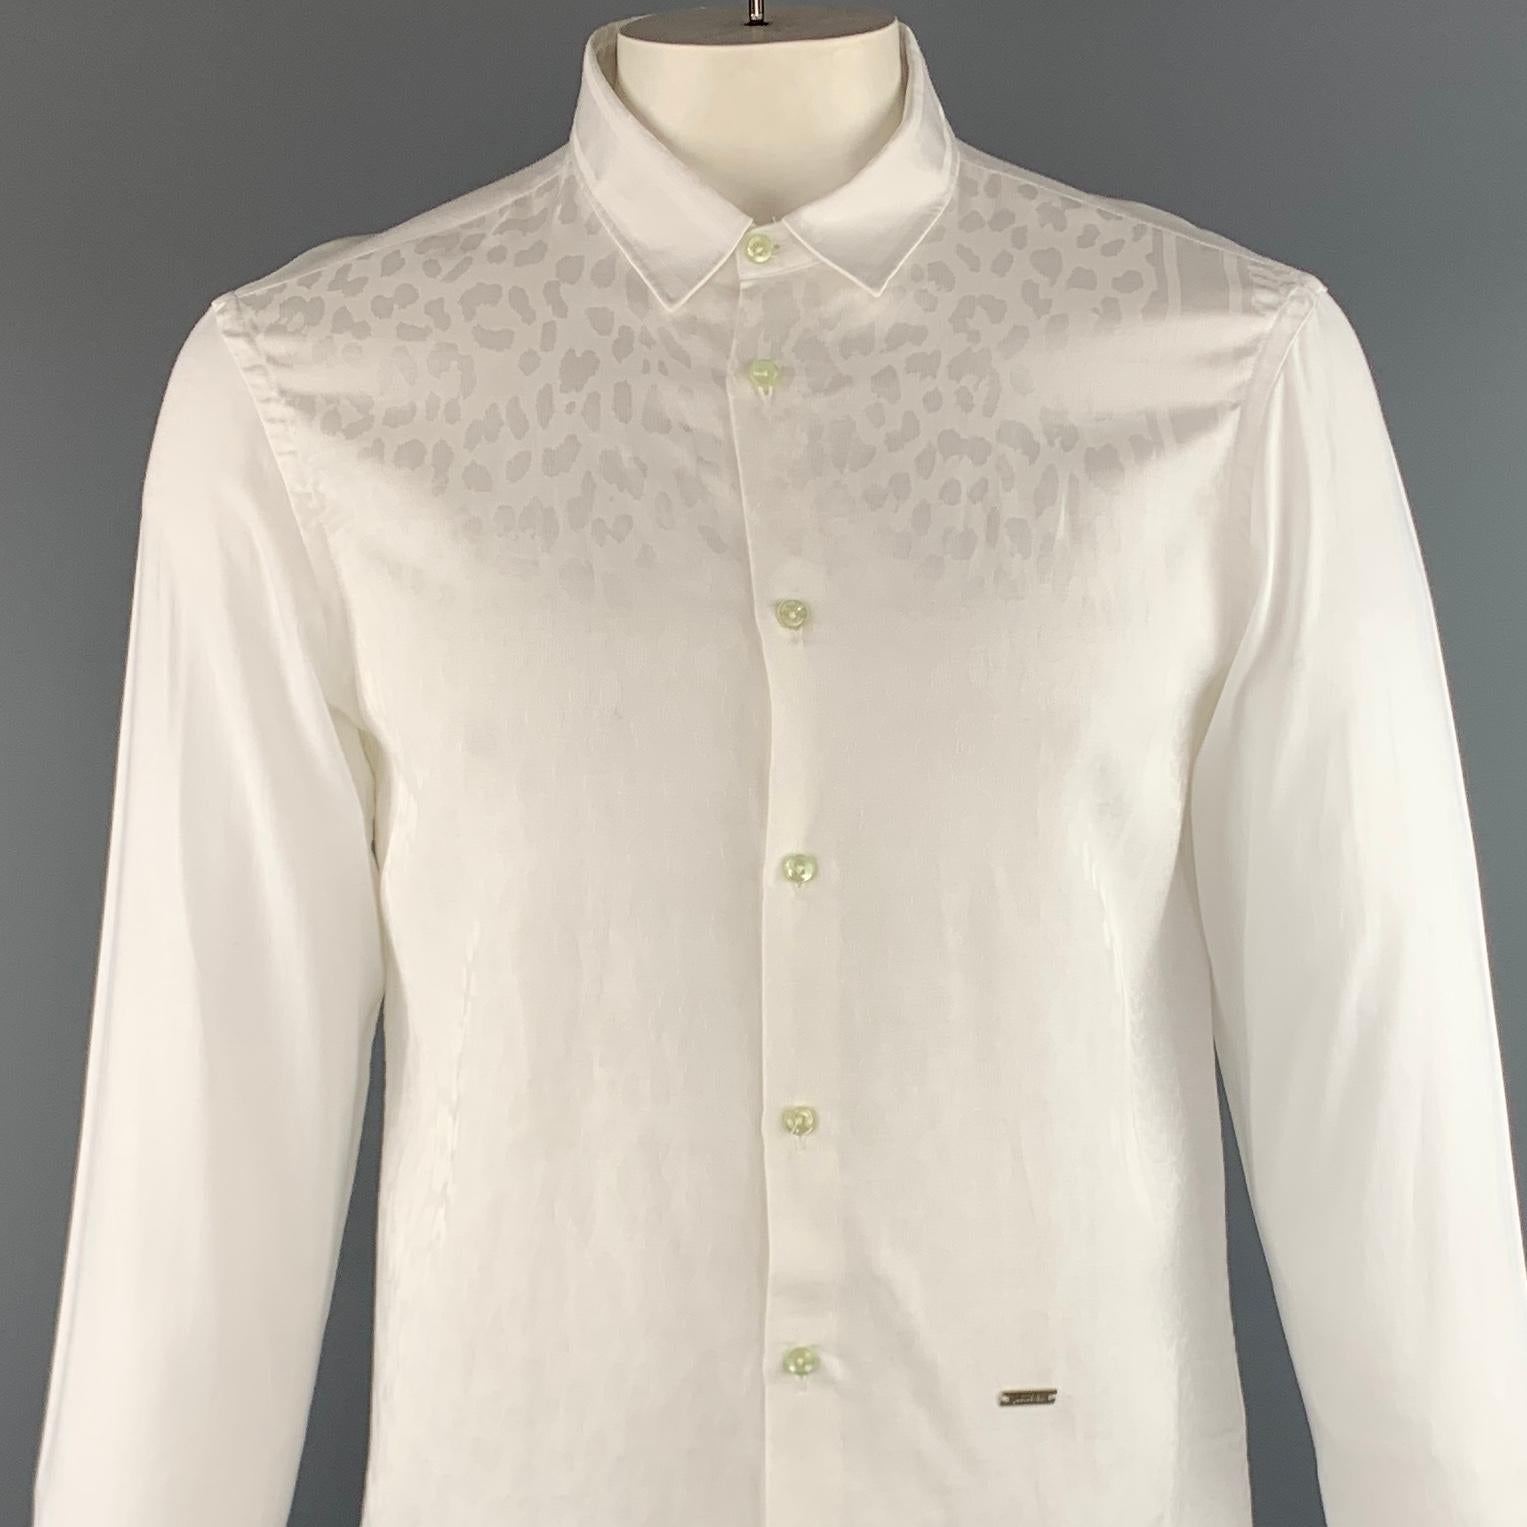 JUST CAVALLI long sleeve shirt comes in a white on white animal print cotton / viscose featuring a button up style, tint green buttons, and a spread collar. Made in Romania.

Excellent Pre-Owned Condition.
Marked: 52

Measurements:

Shoulder: 17.5